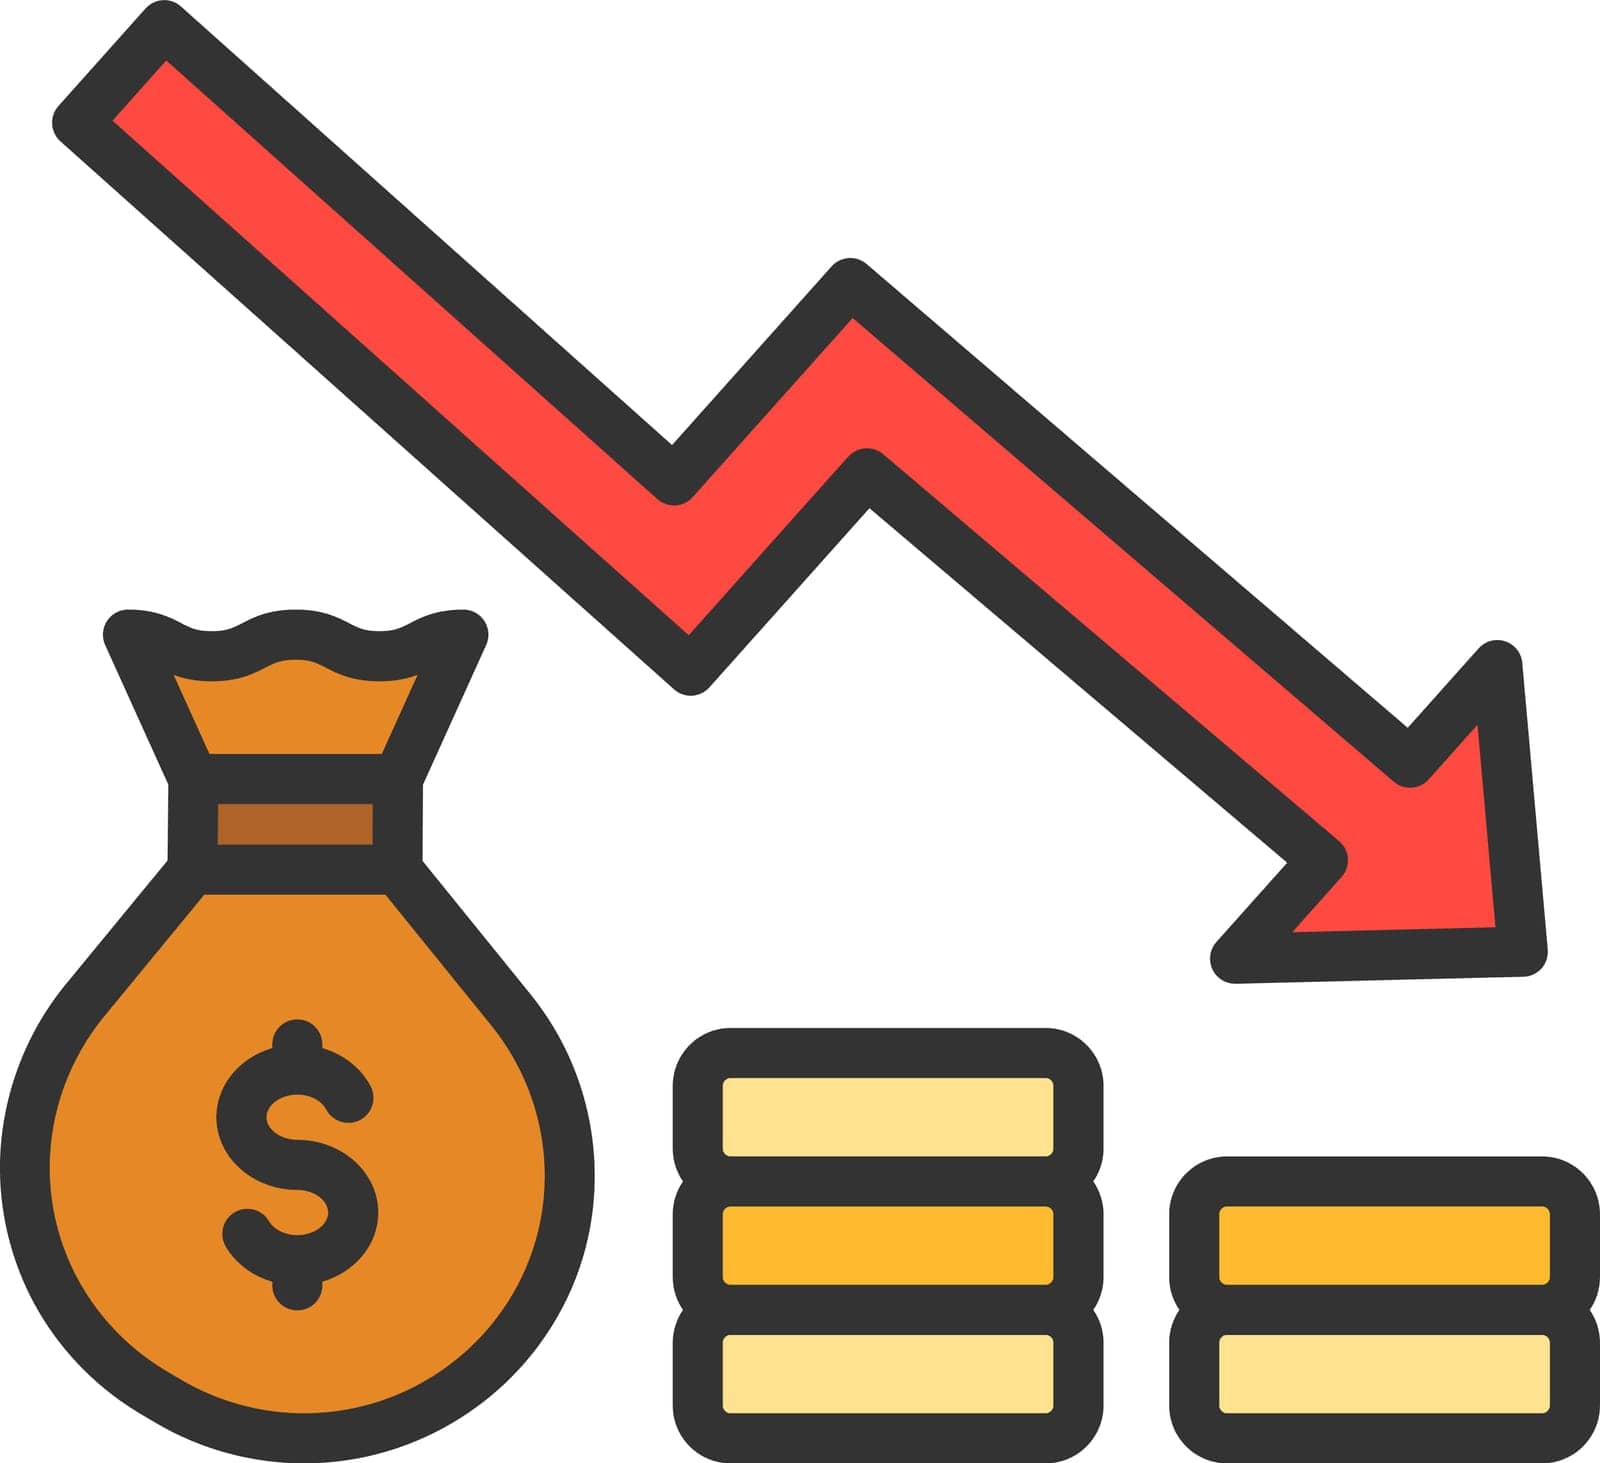 Recession icon vector image. Suitable for mobile application web application and print media.